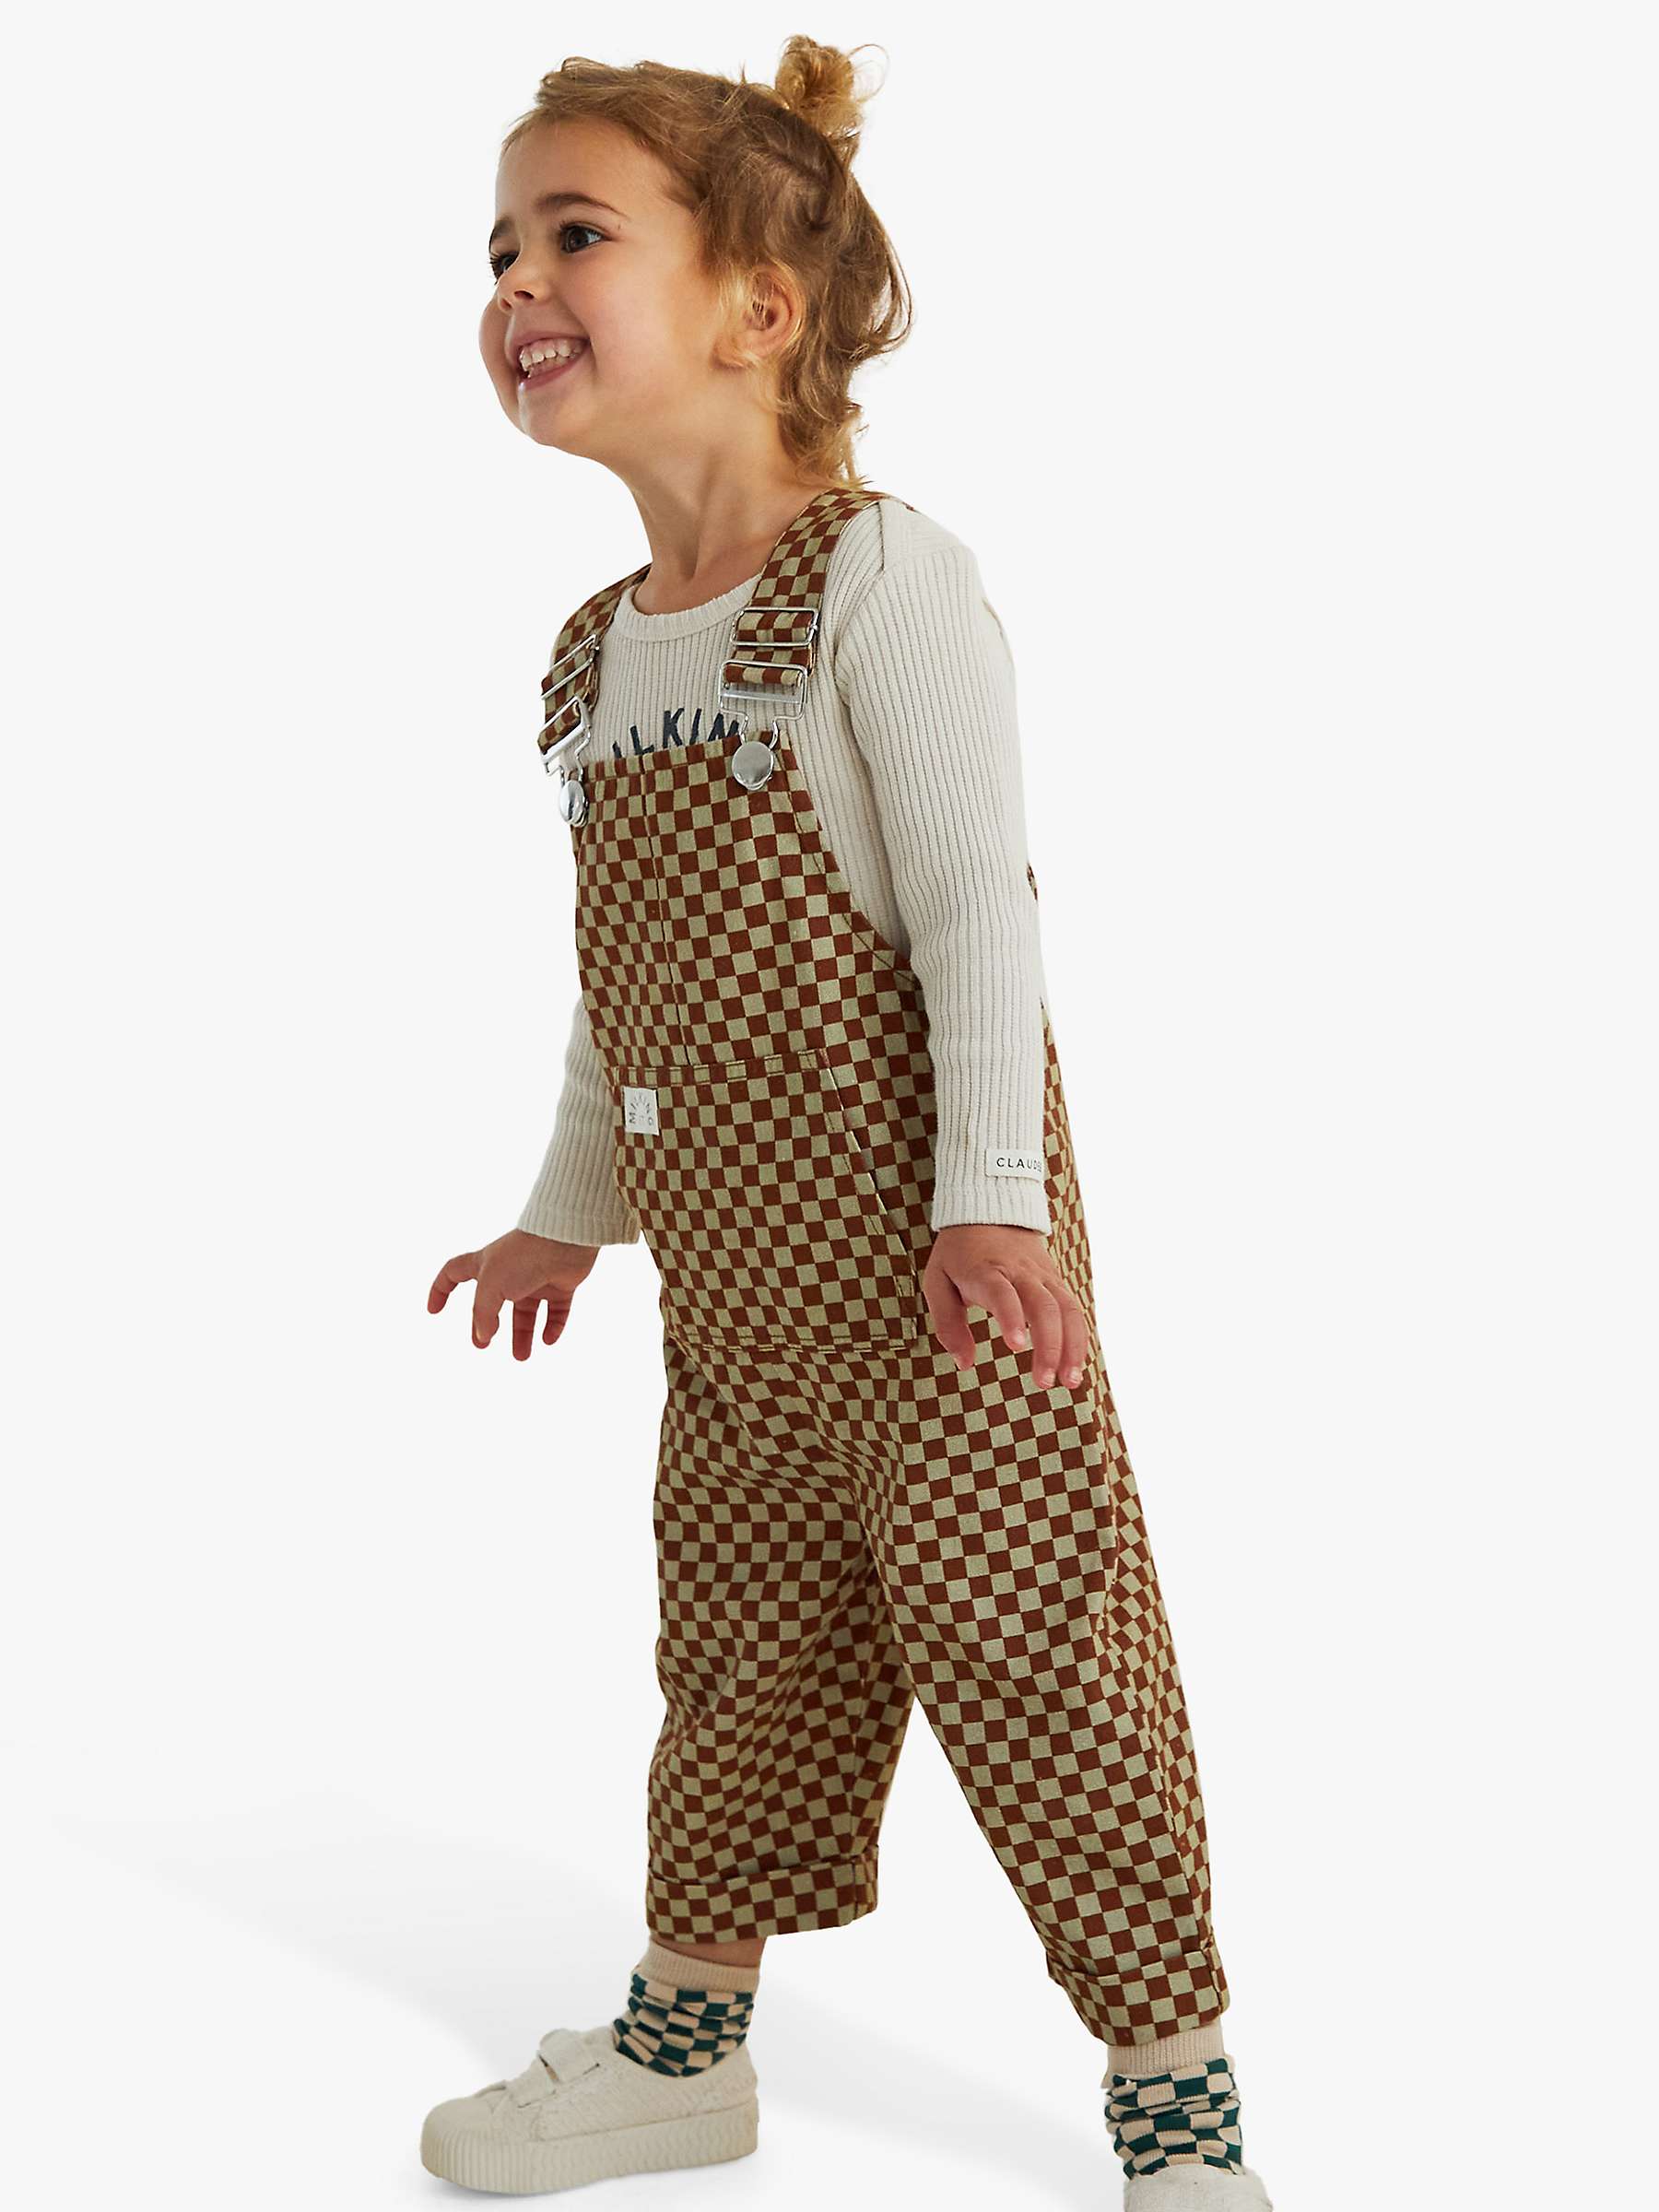 Buy Claude & Co Baby Organic Cotton Checkerboard Print Dungarees, Brick Online at johnlewis.com